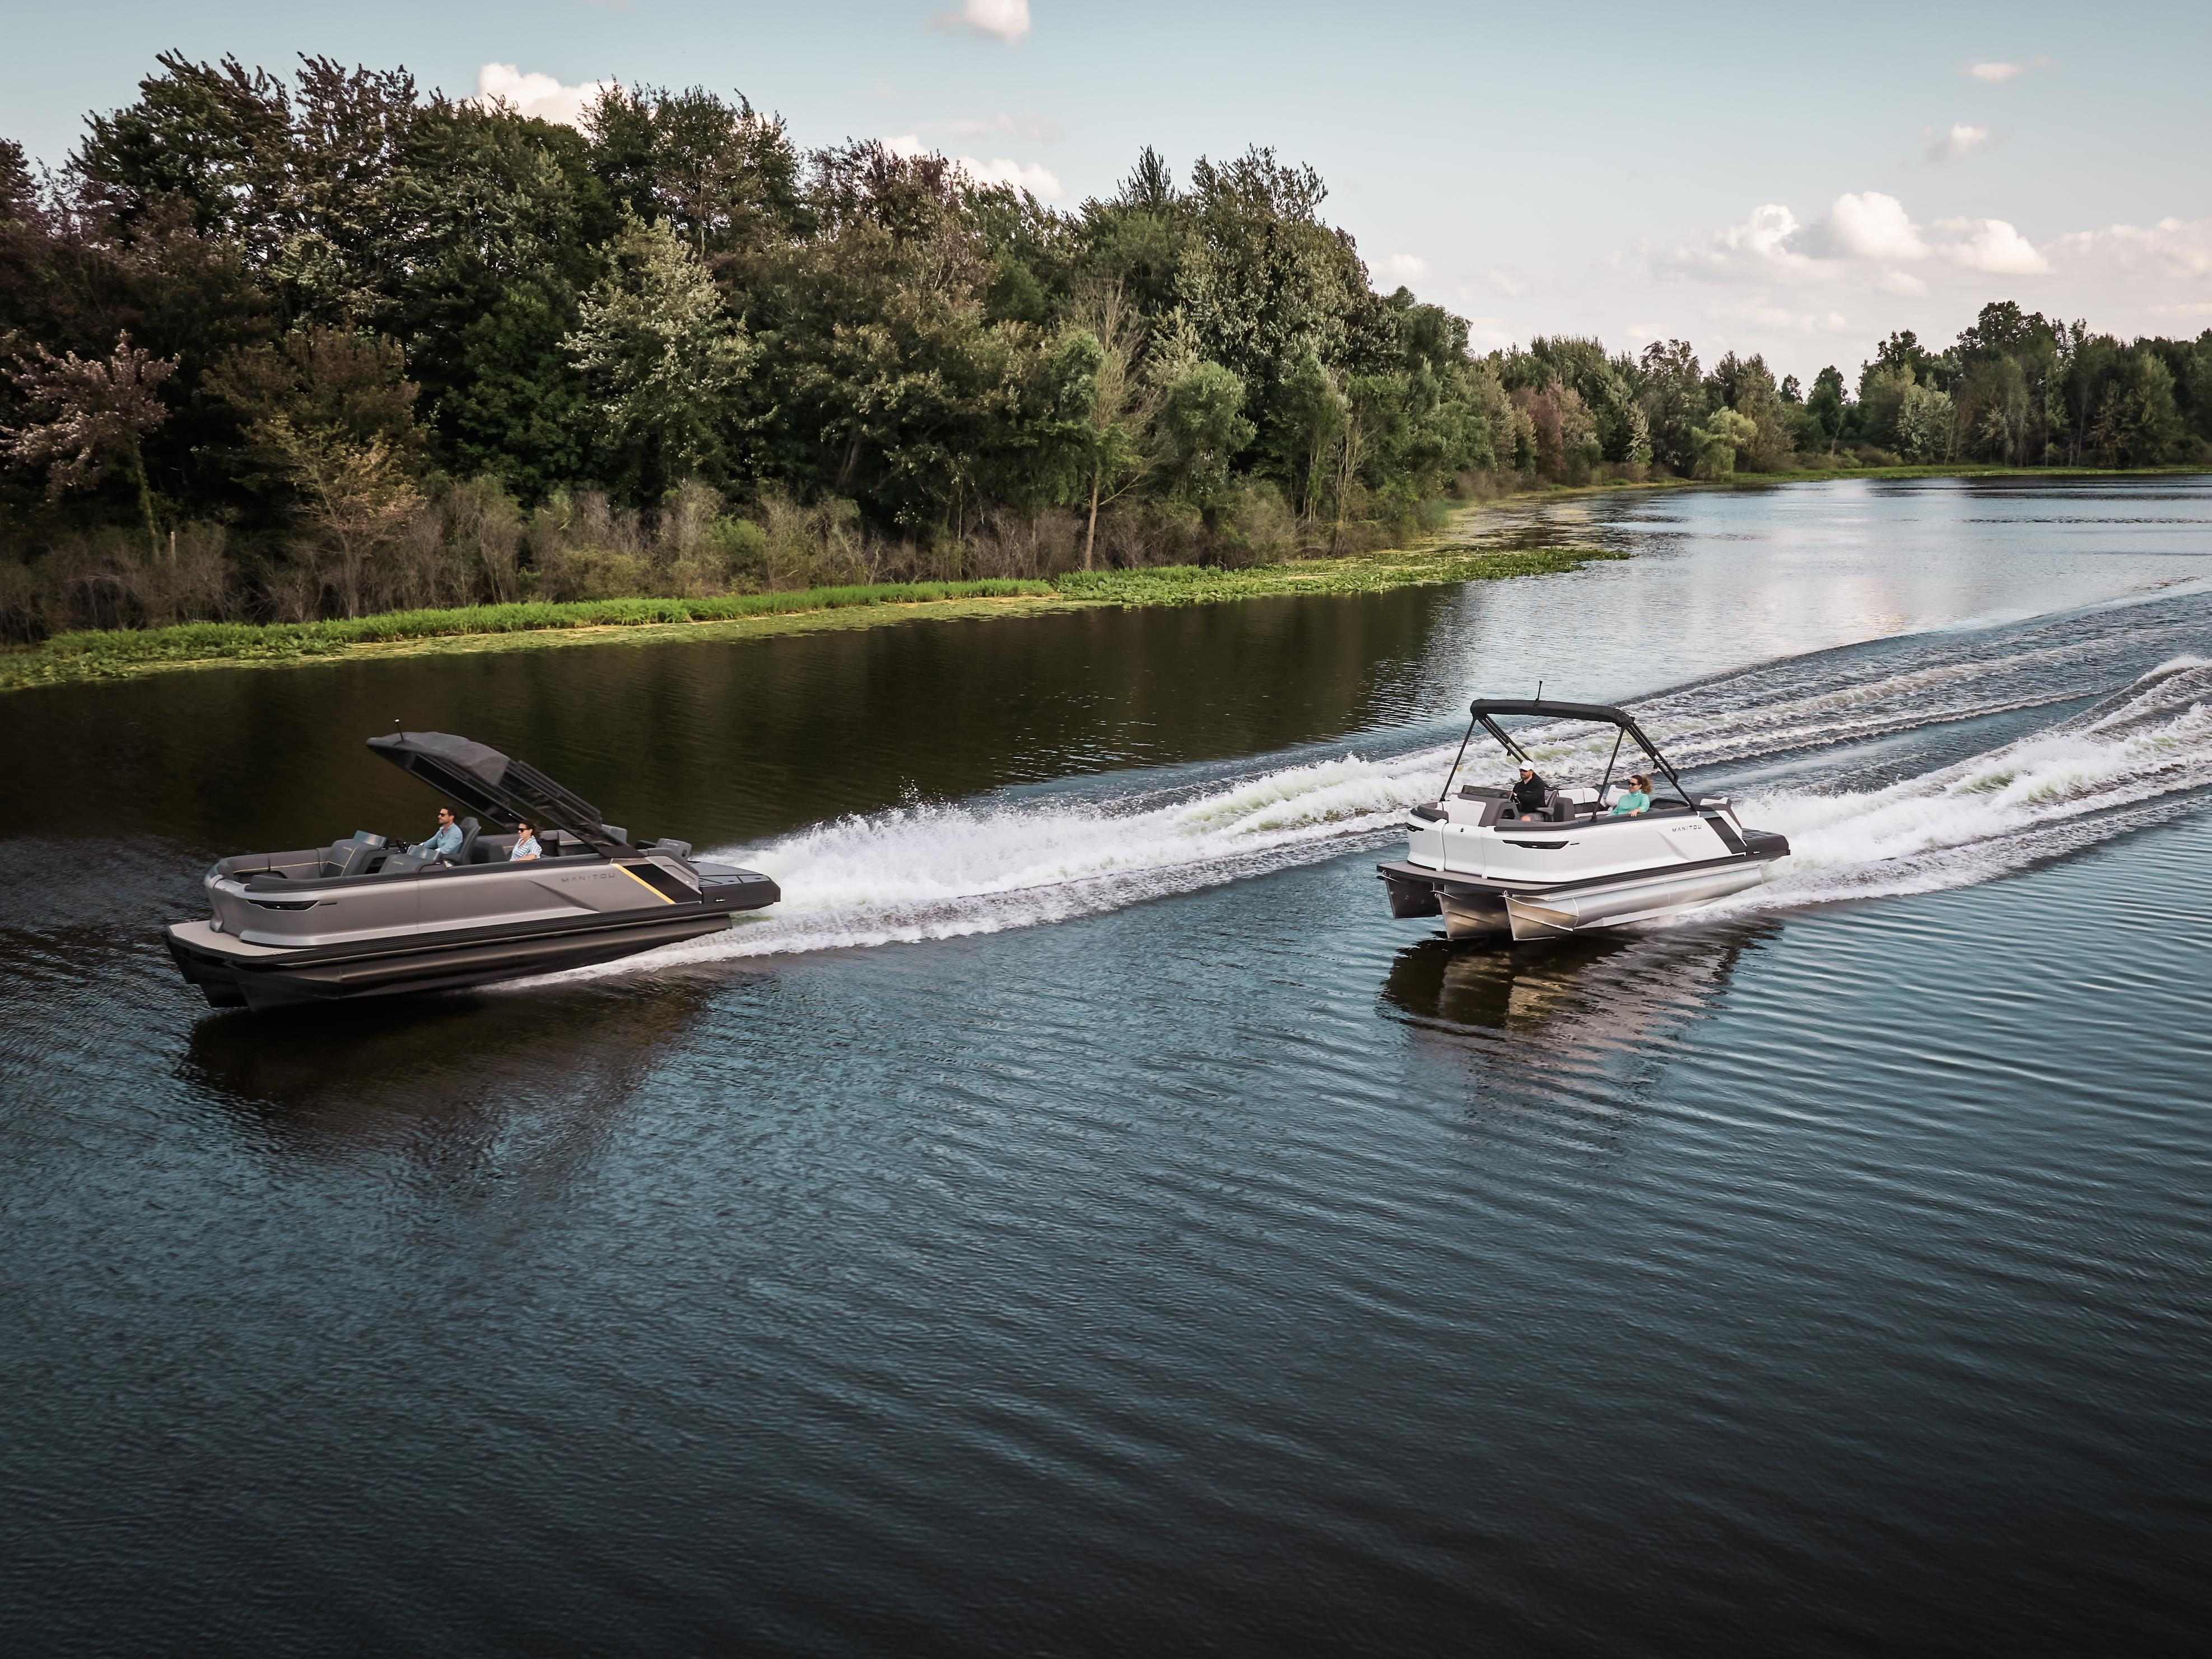 Cruise and Explore pontoon boats racing on water